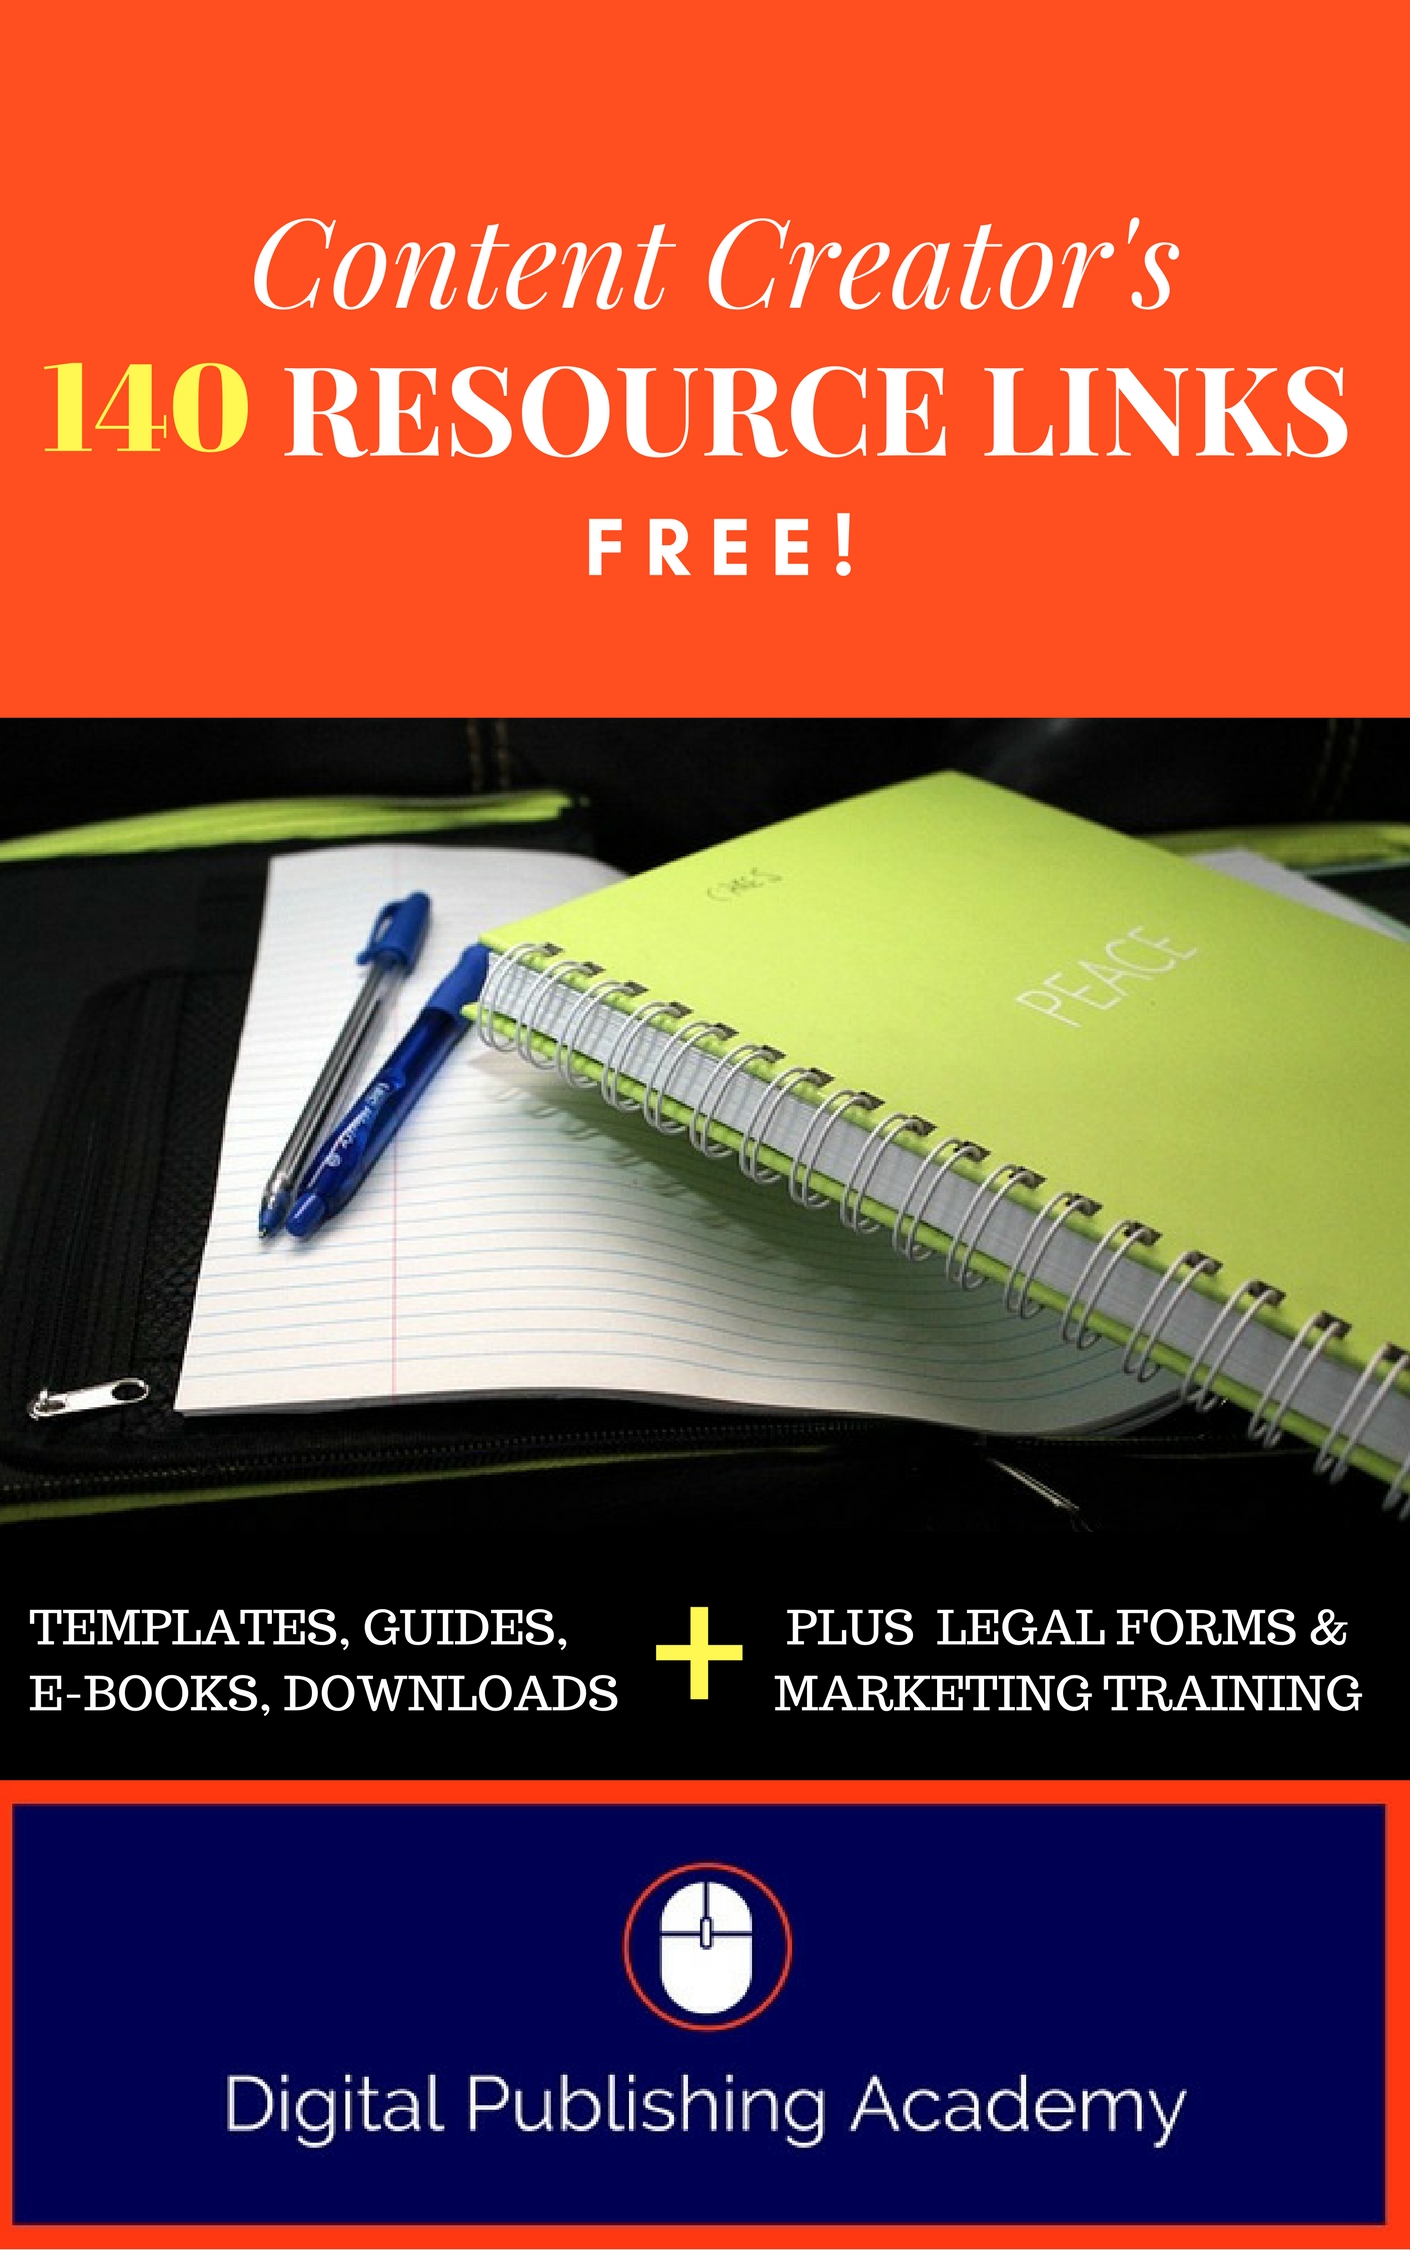 Content Creators and Marketers: 140 Links to the BEST FREE Resources for You